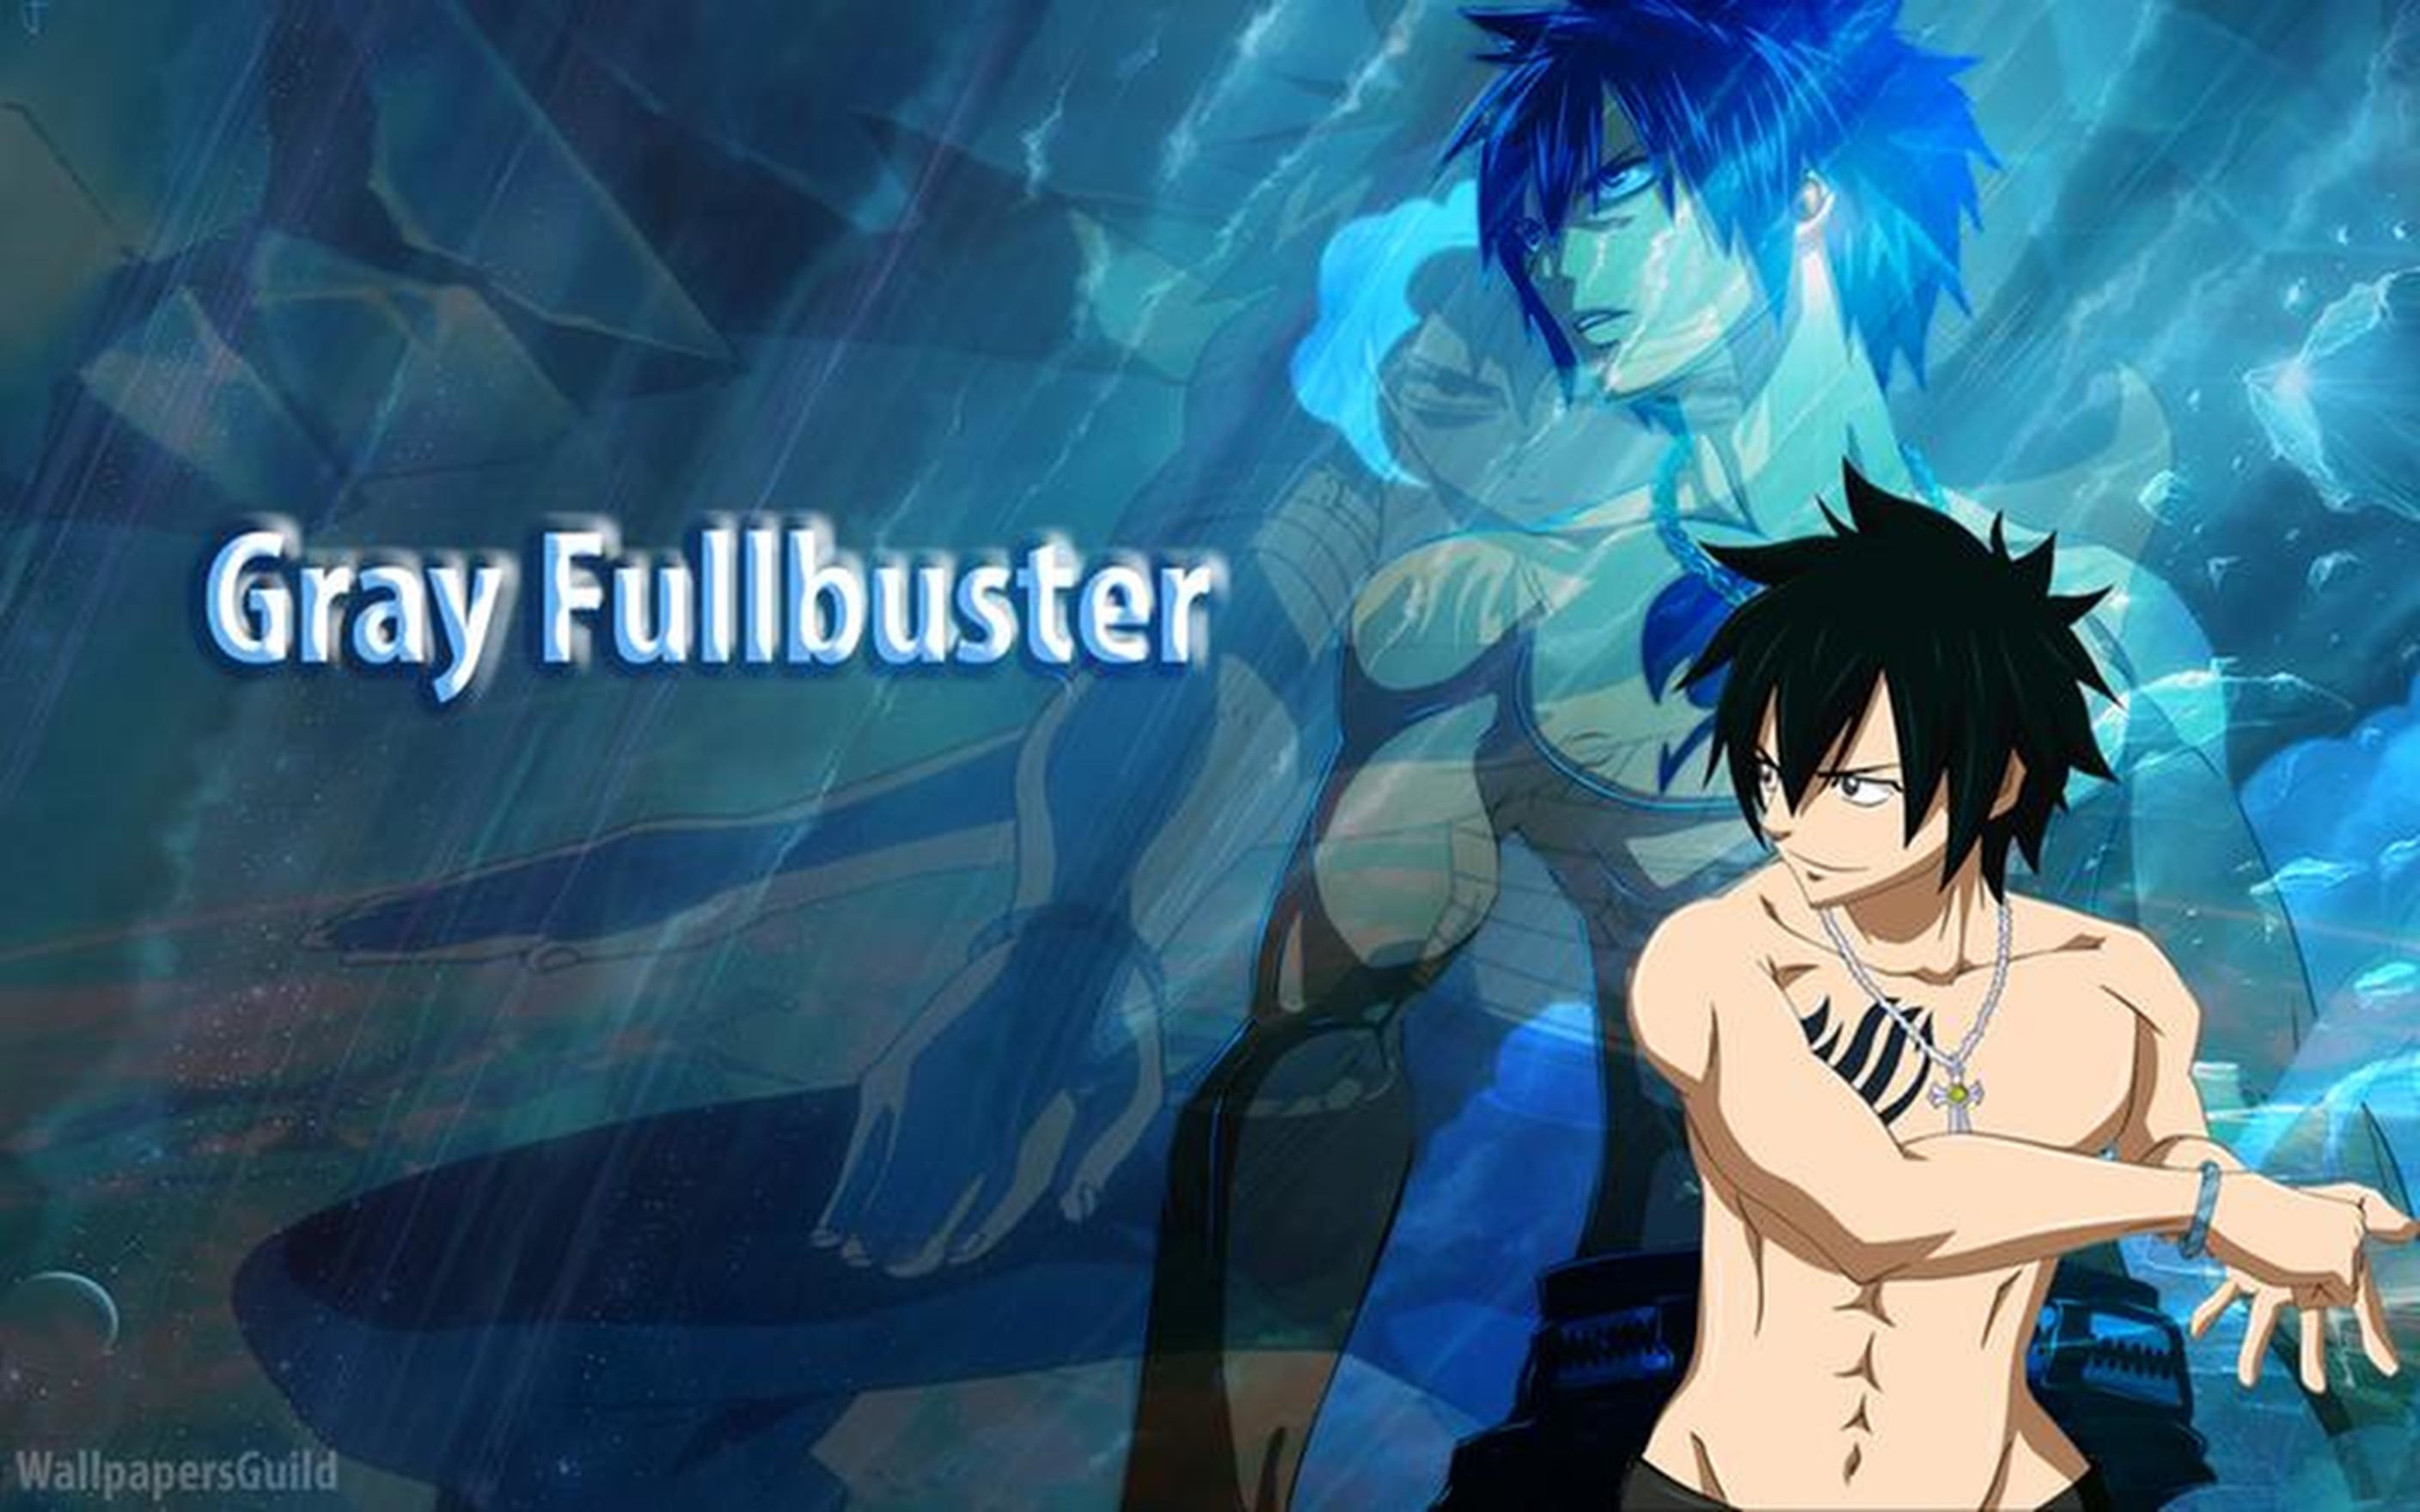 2816x1760 2816 x Auto : Gray Fullbuster Fairy Tail Wallpapers By Vpb170 Dreamsky10  Com, Black And